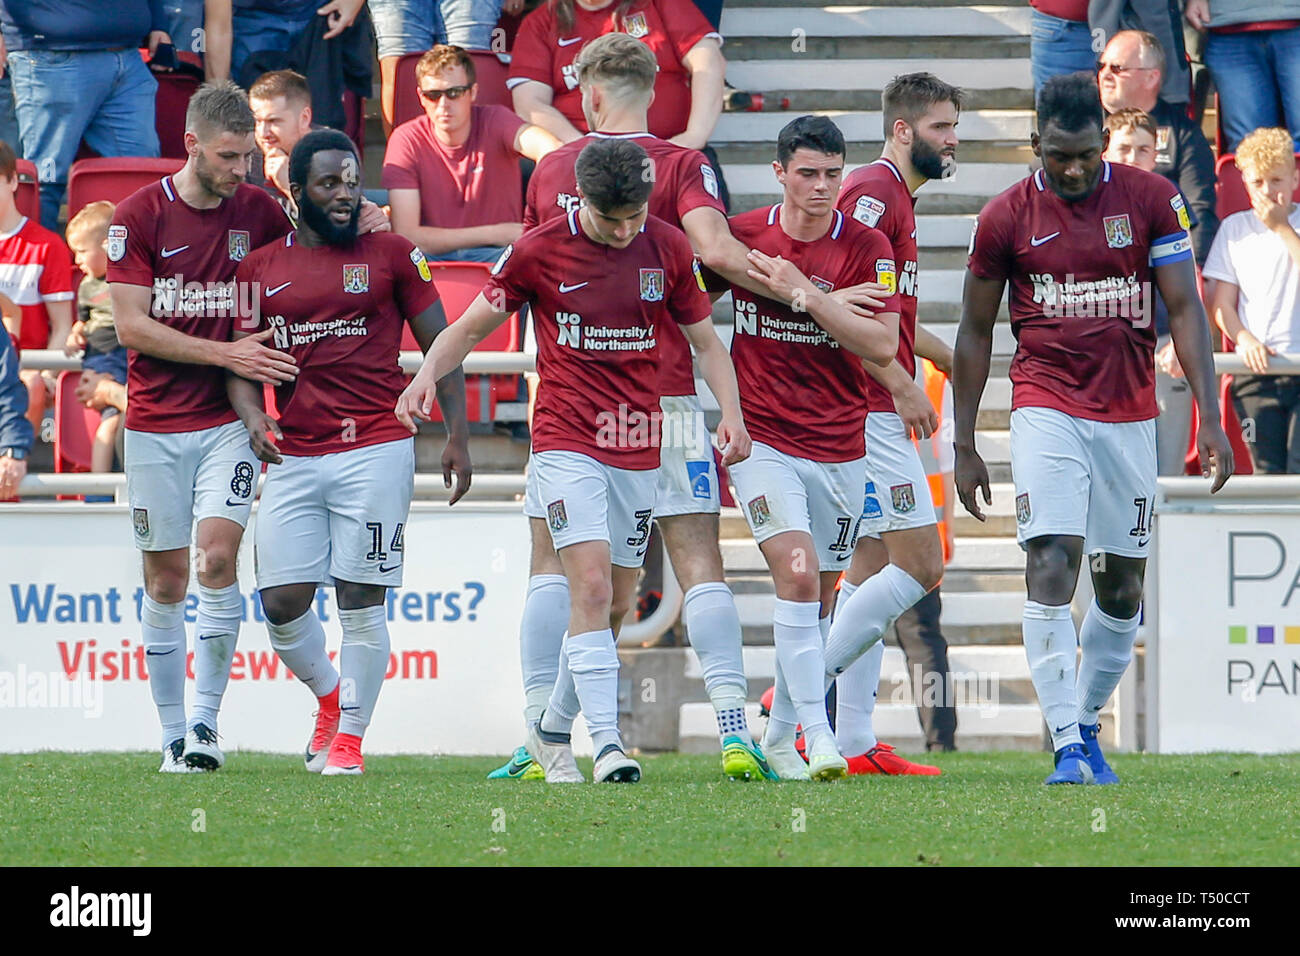 Northampton, UK. 19th Apr 2019.  Junior Morias celebrates after scoring for Northampton Town, to extend their lead making it 3 - 1 against Macclesfield Town, during the Sky Bet League 2 match between Northampton Town and Macclesfield Town at the PTS Academy Stadium, Northampton on Friday 19th April 2019.    No use in betting, games or a single club/league/player publications. Photograph may only be used for newspaper and/or magazine editorial purposes. Credit: MI News & Sport /Alamy Live News Stock Photo